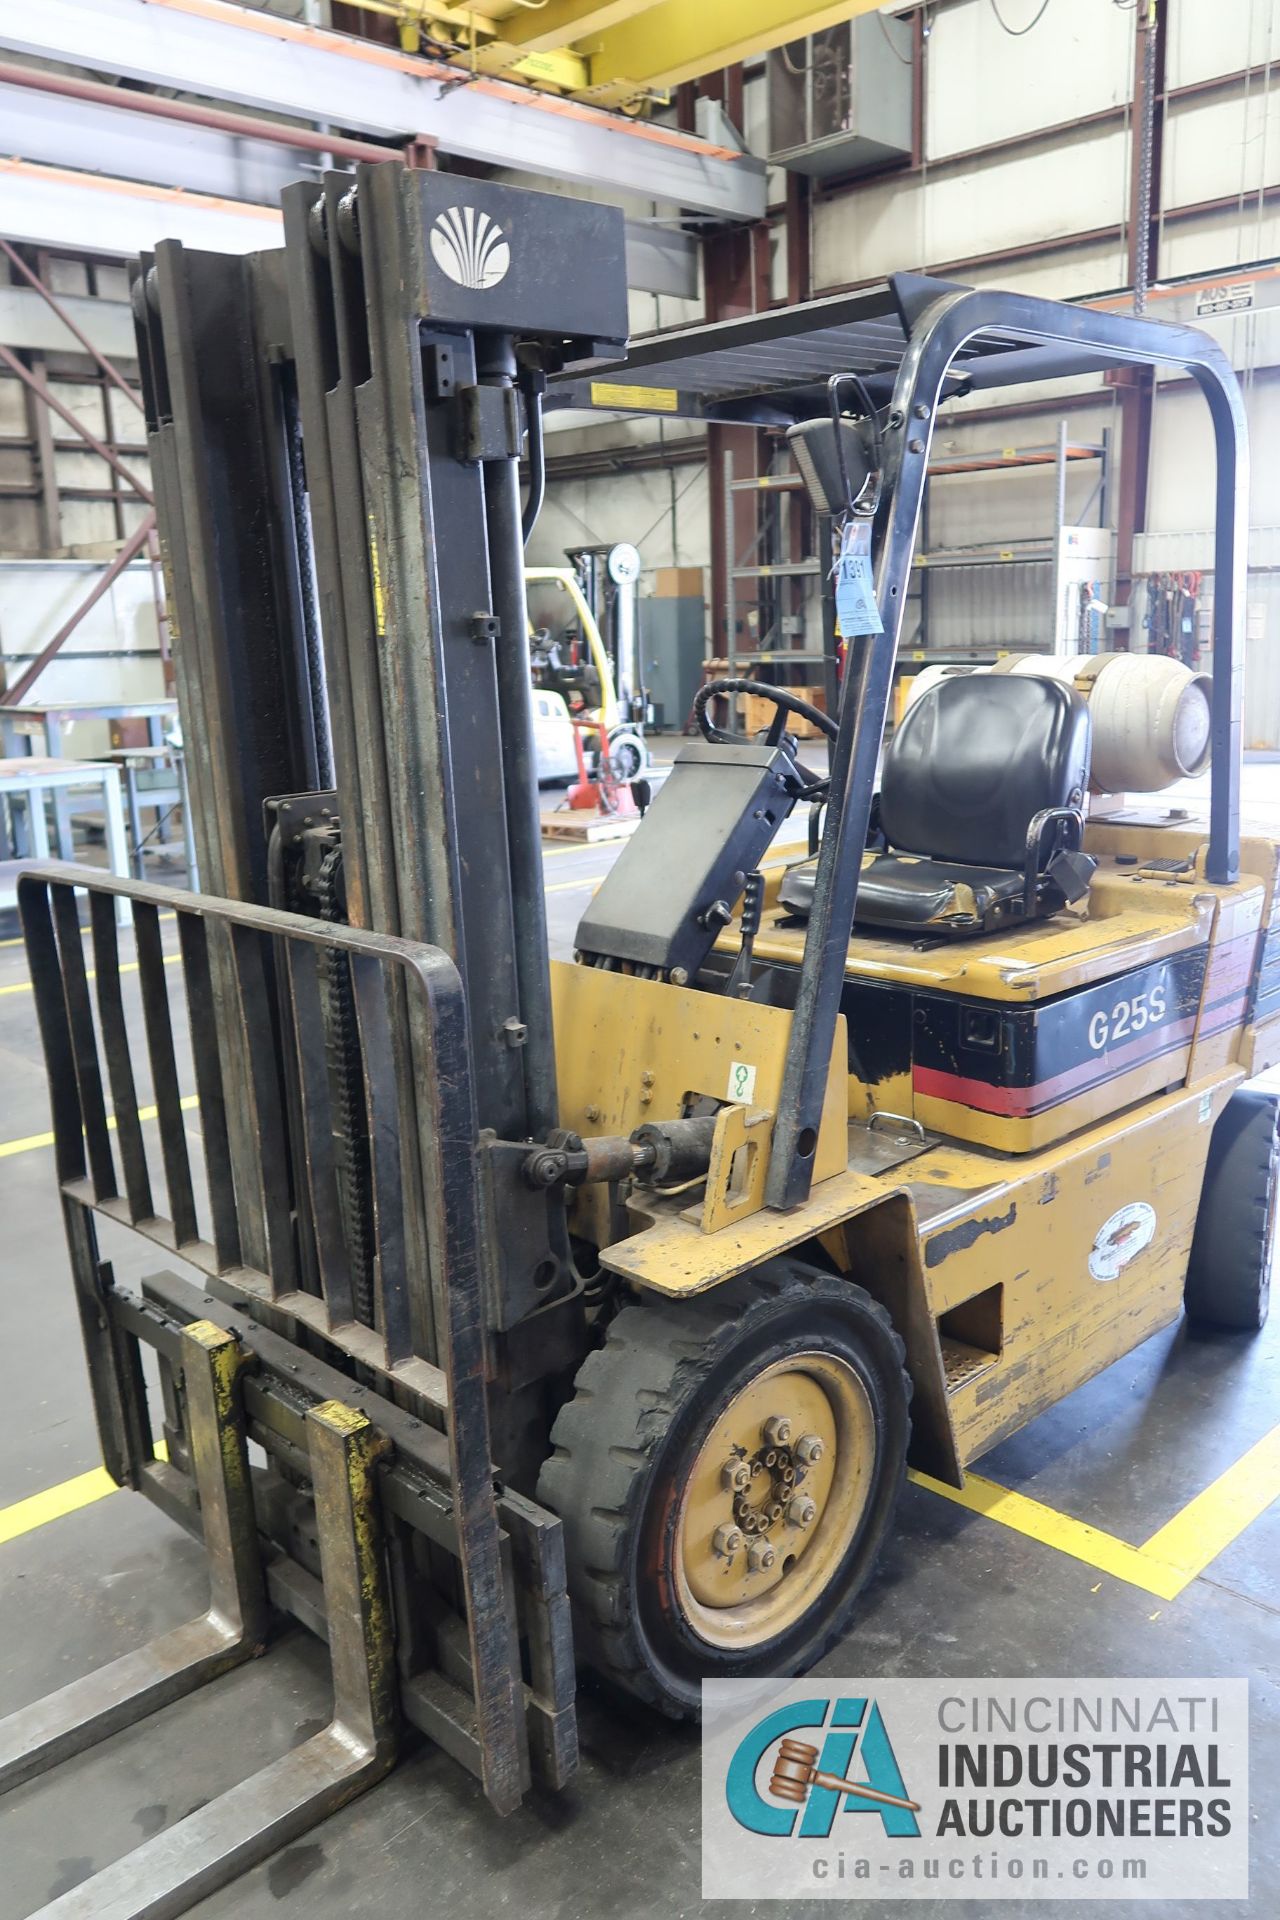 5,000 LB. DAEWOO MODEL G25S LP GAS SOLID PNEUMATIC TIRE LIFT TRUCK, 10-02003, 3-STAGE MAST, 188"